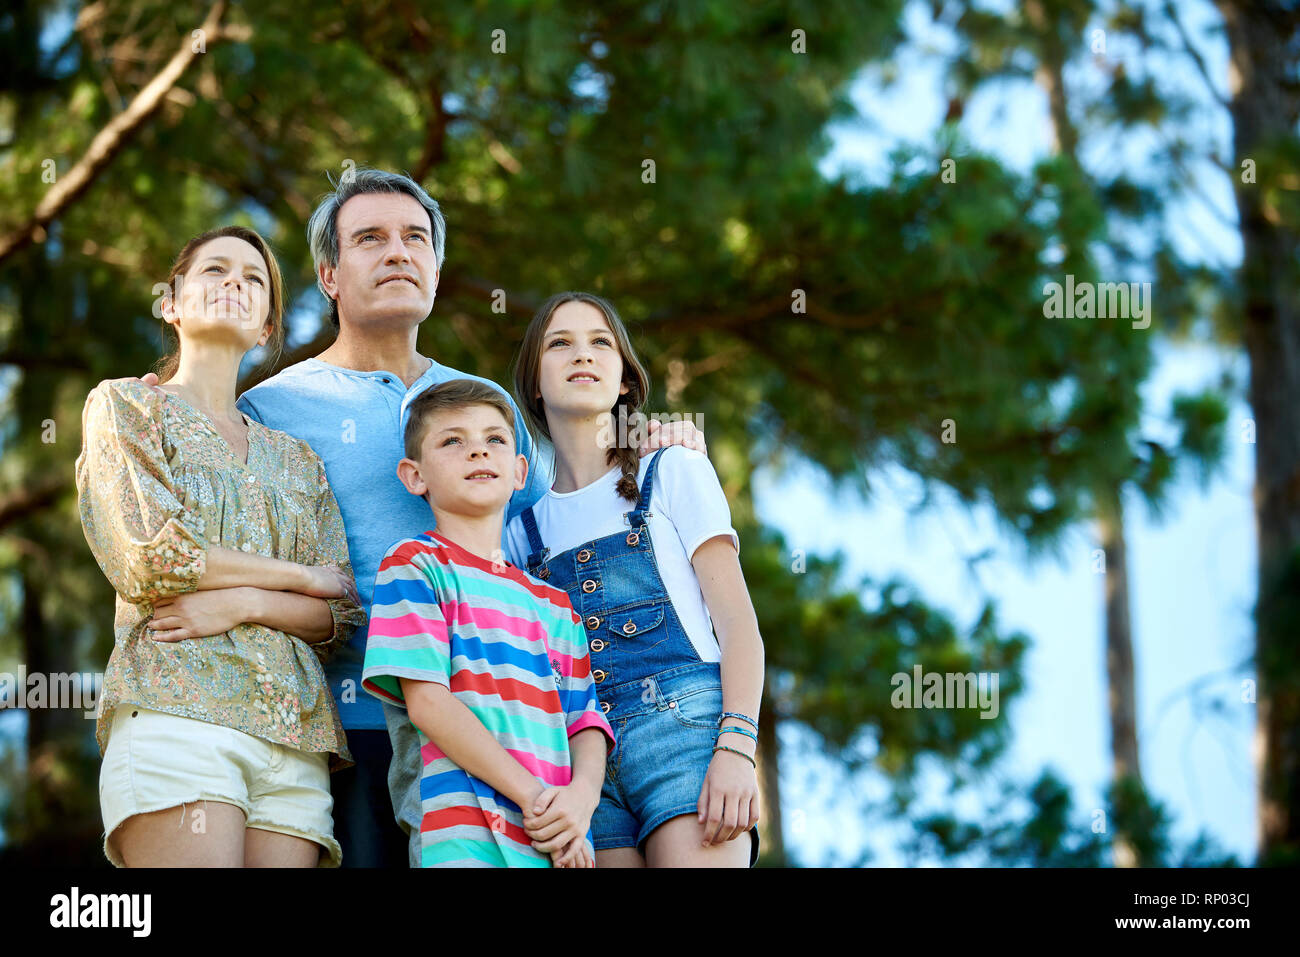 Family standing together in forest Stock Photo